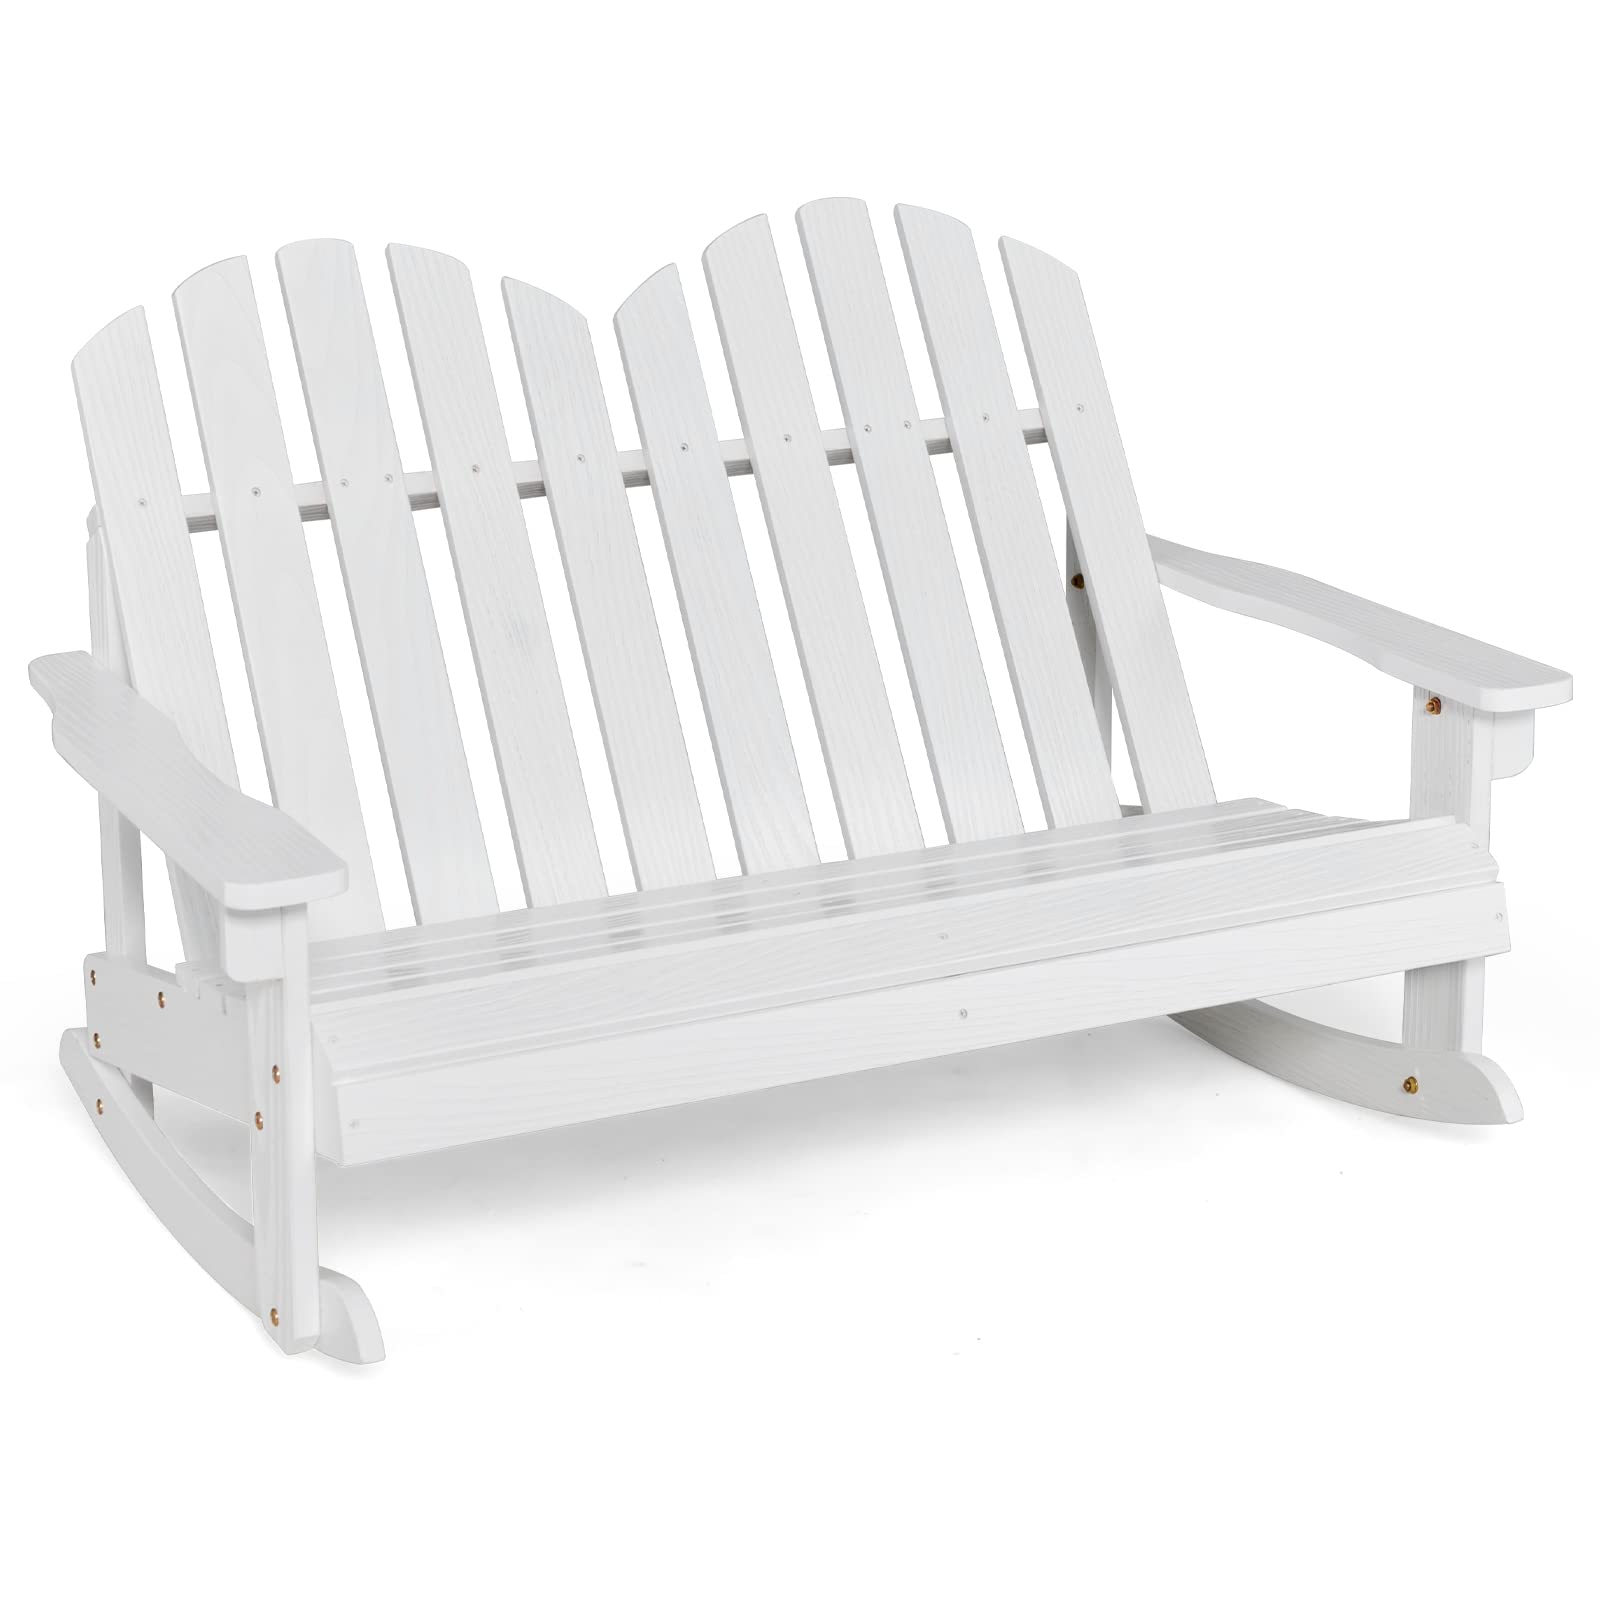 Giantex 2-Person Adirondack Rocking Chair - Kids Outdoor Rocking Bench with Slatted Seat, High Backrest